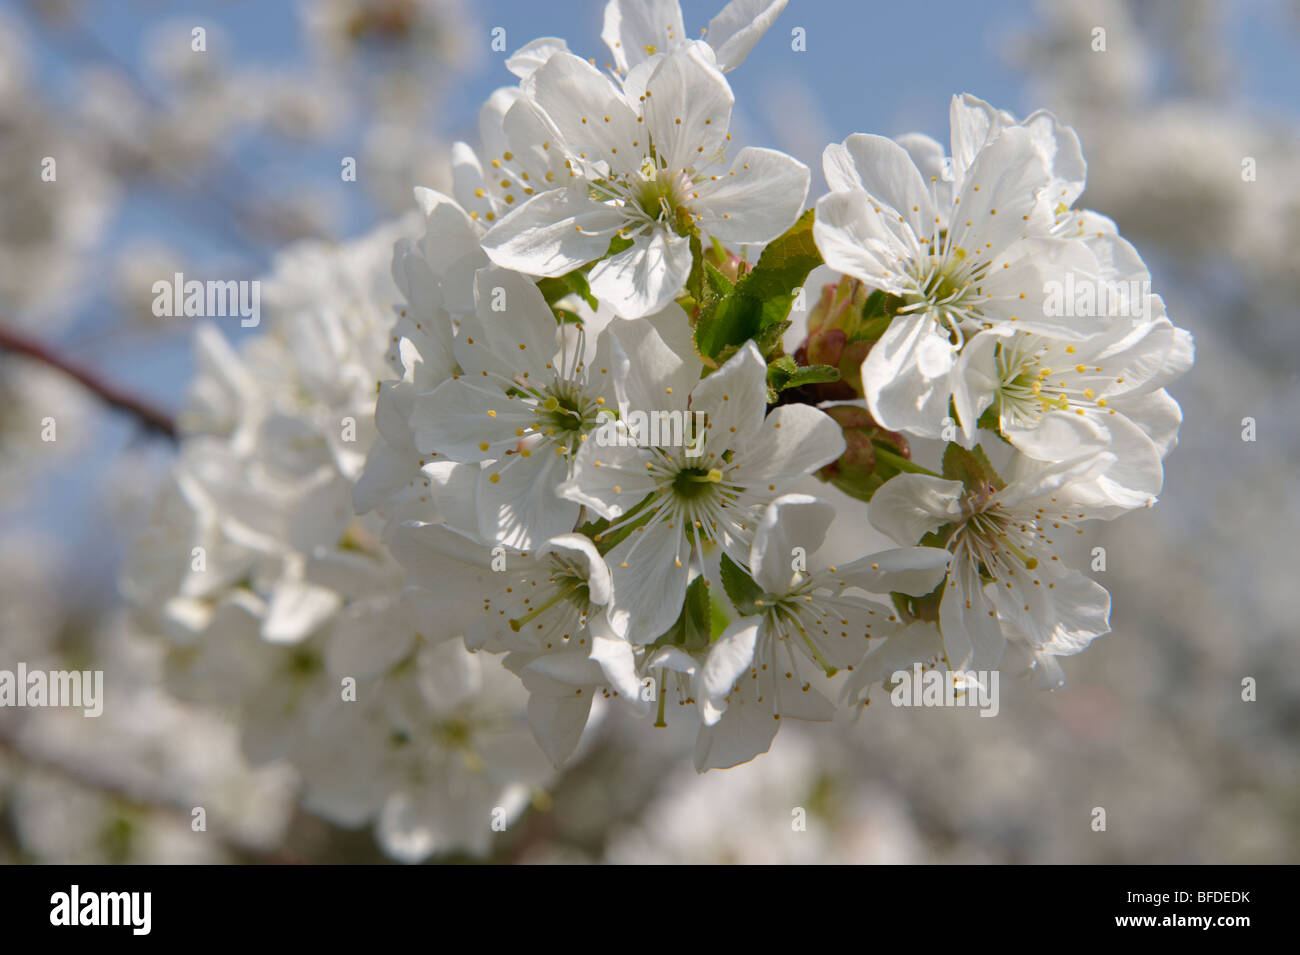 White cherry blossom on the orchard tree. Stock Photo